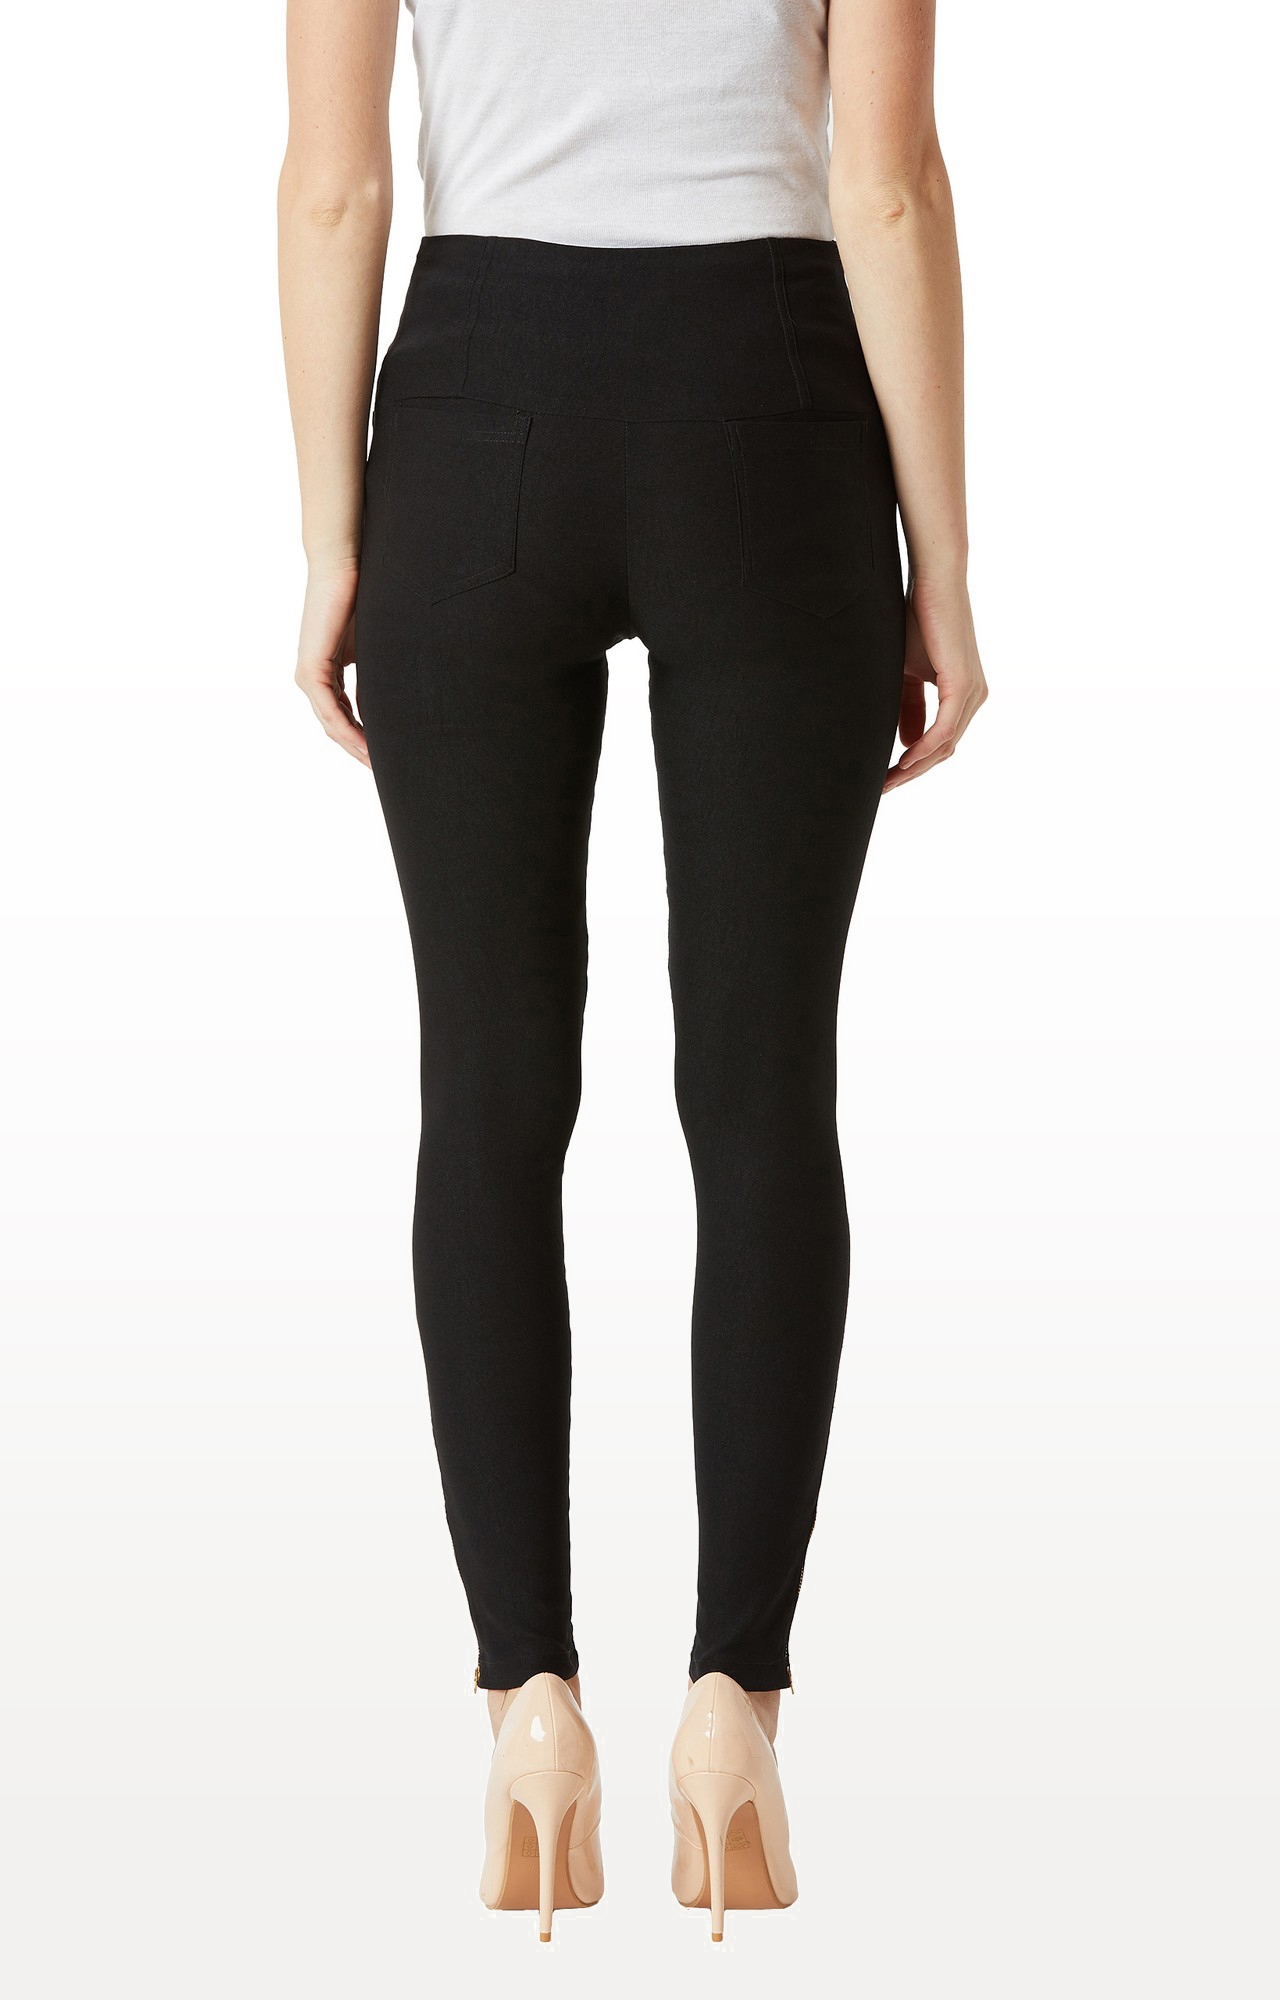 MISS CHASE | Women's Black Solid Jeggings 3